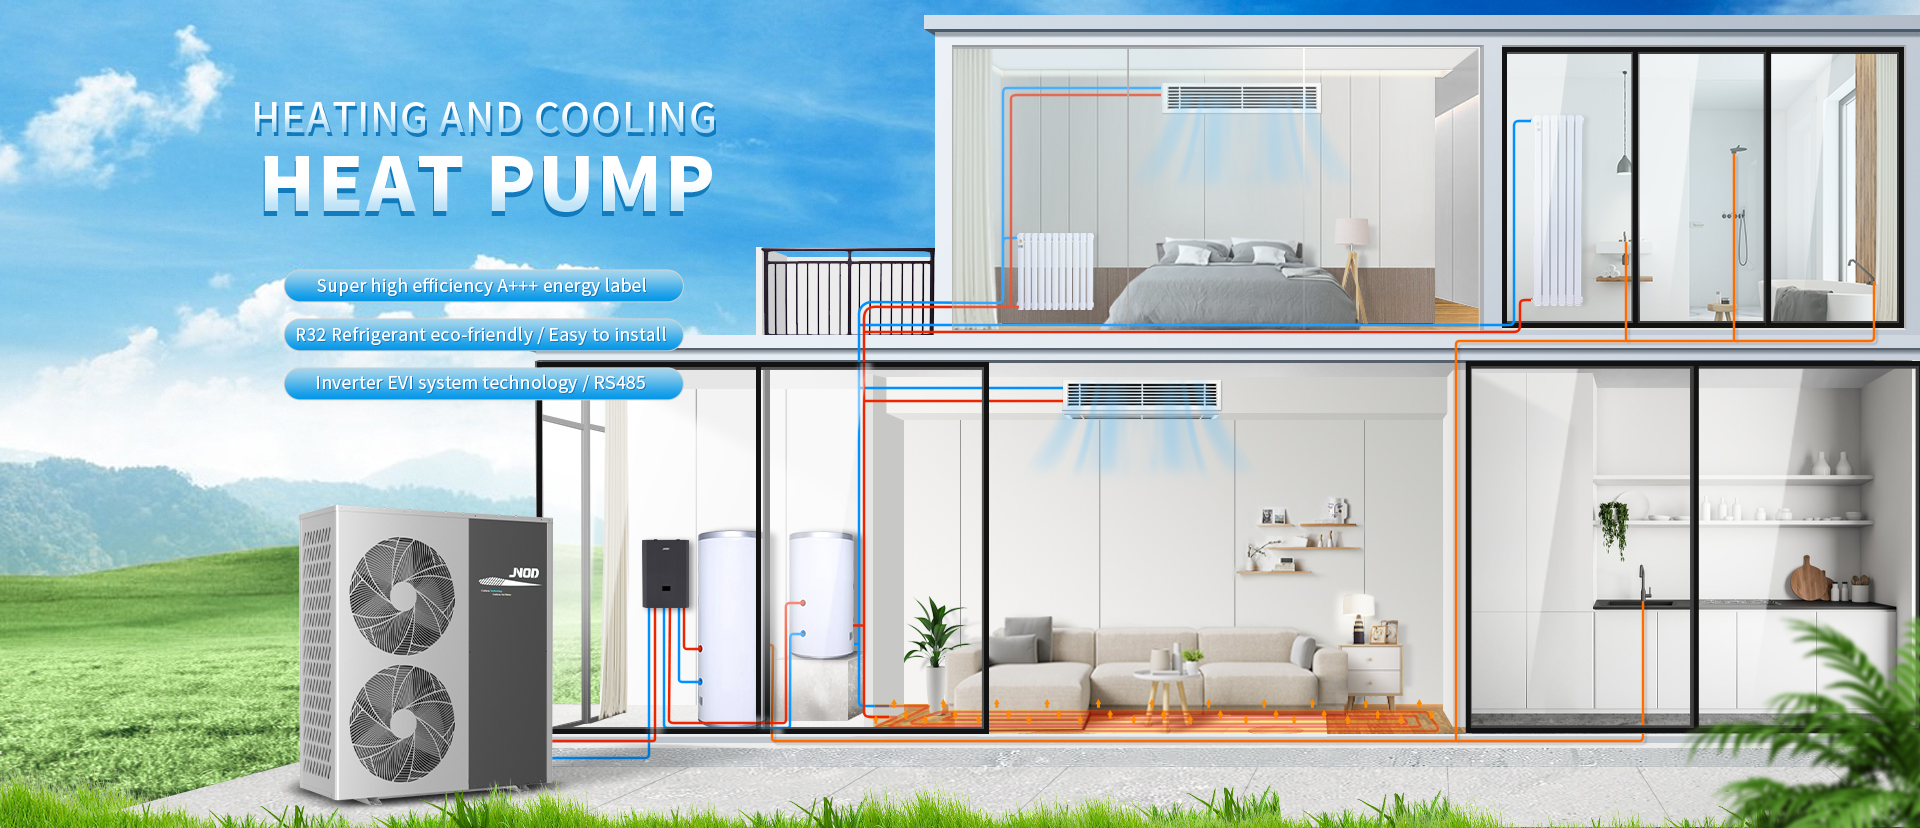 Heating And Cooling Heat Pump wholesaler